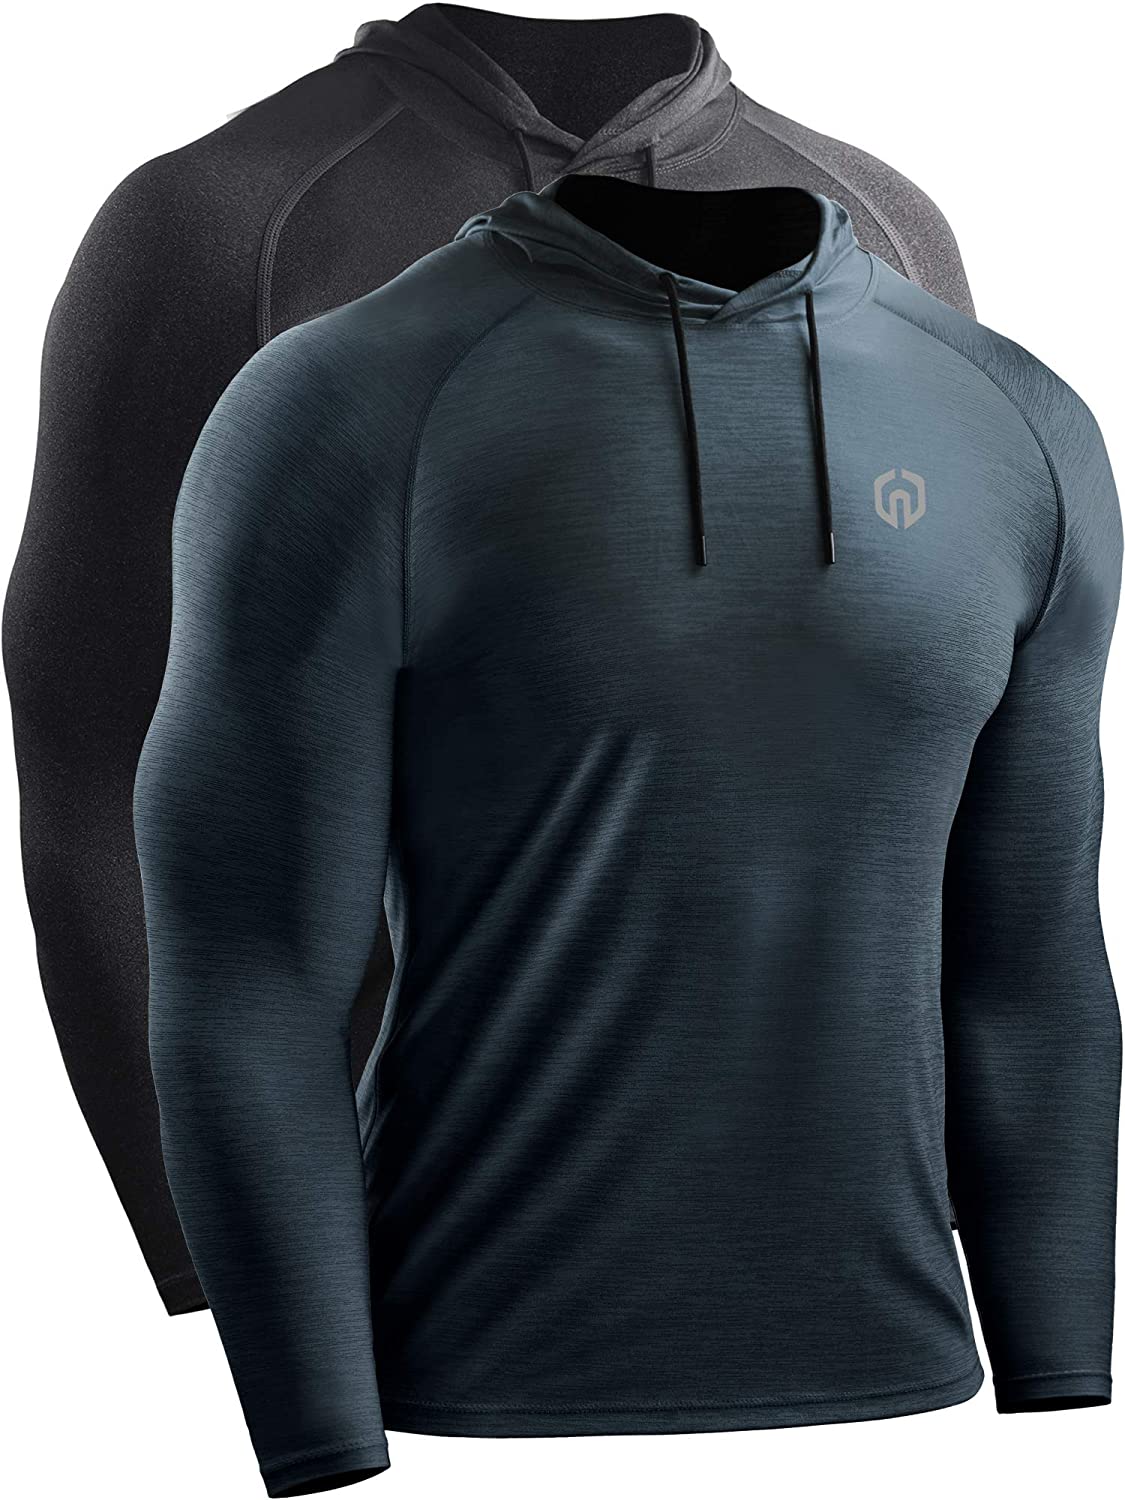 Neleus Men's Dry Fit Athletic Workout Running Shirts Long Sleeve